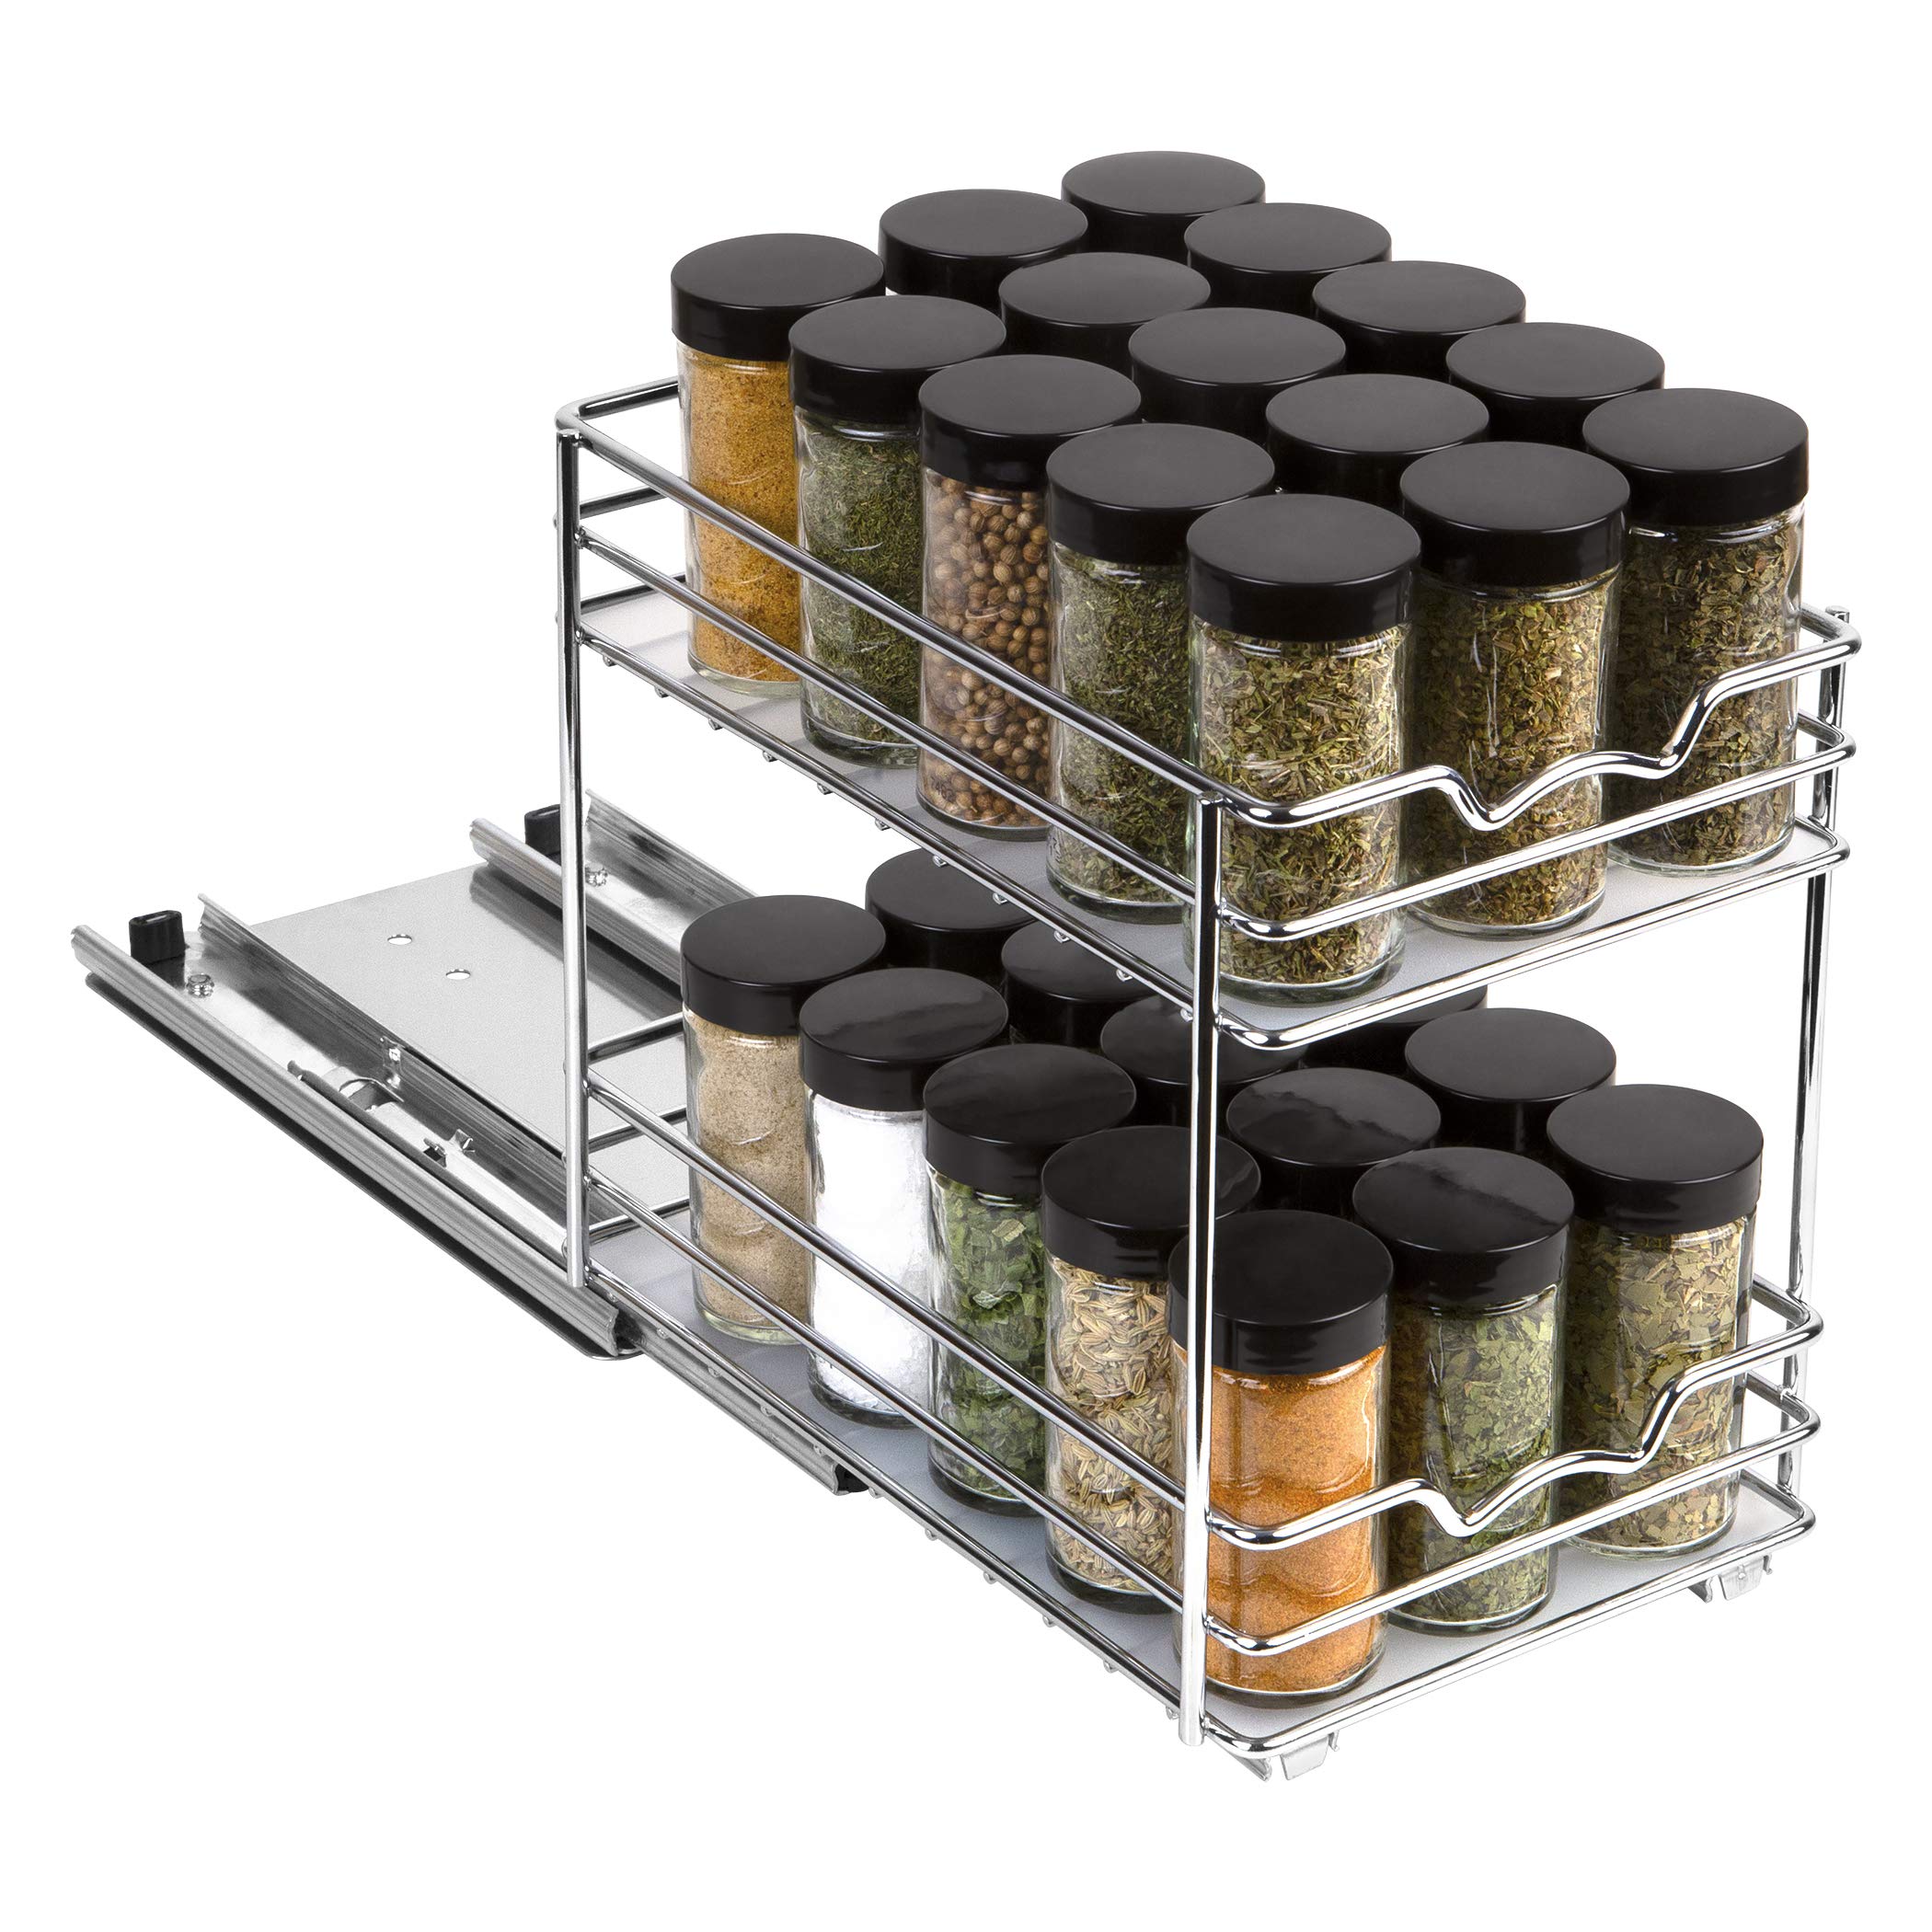 HOLDN� STORAGE Spice Rack Organizer for Cabinet, Heavy Duty - Pull Out Spice Rack 5 Year Warranty- 6" Wx10-3/8 Dx8-7/8 H Requires a 6.9� cabinet opening  - Very Good